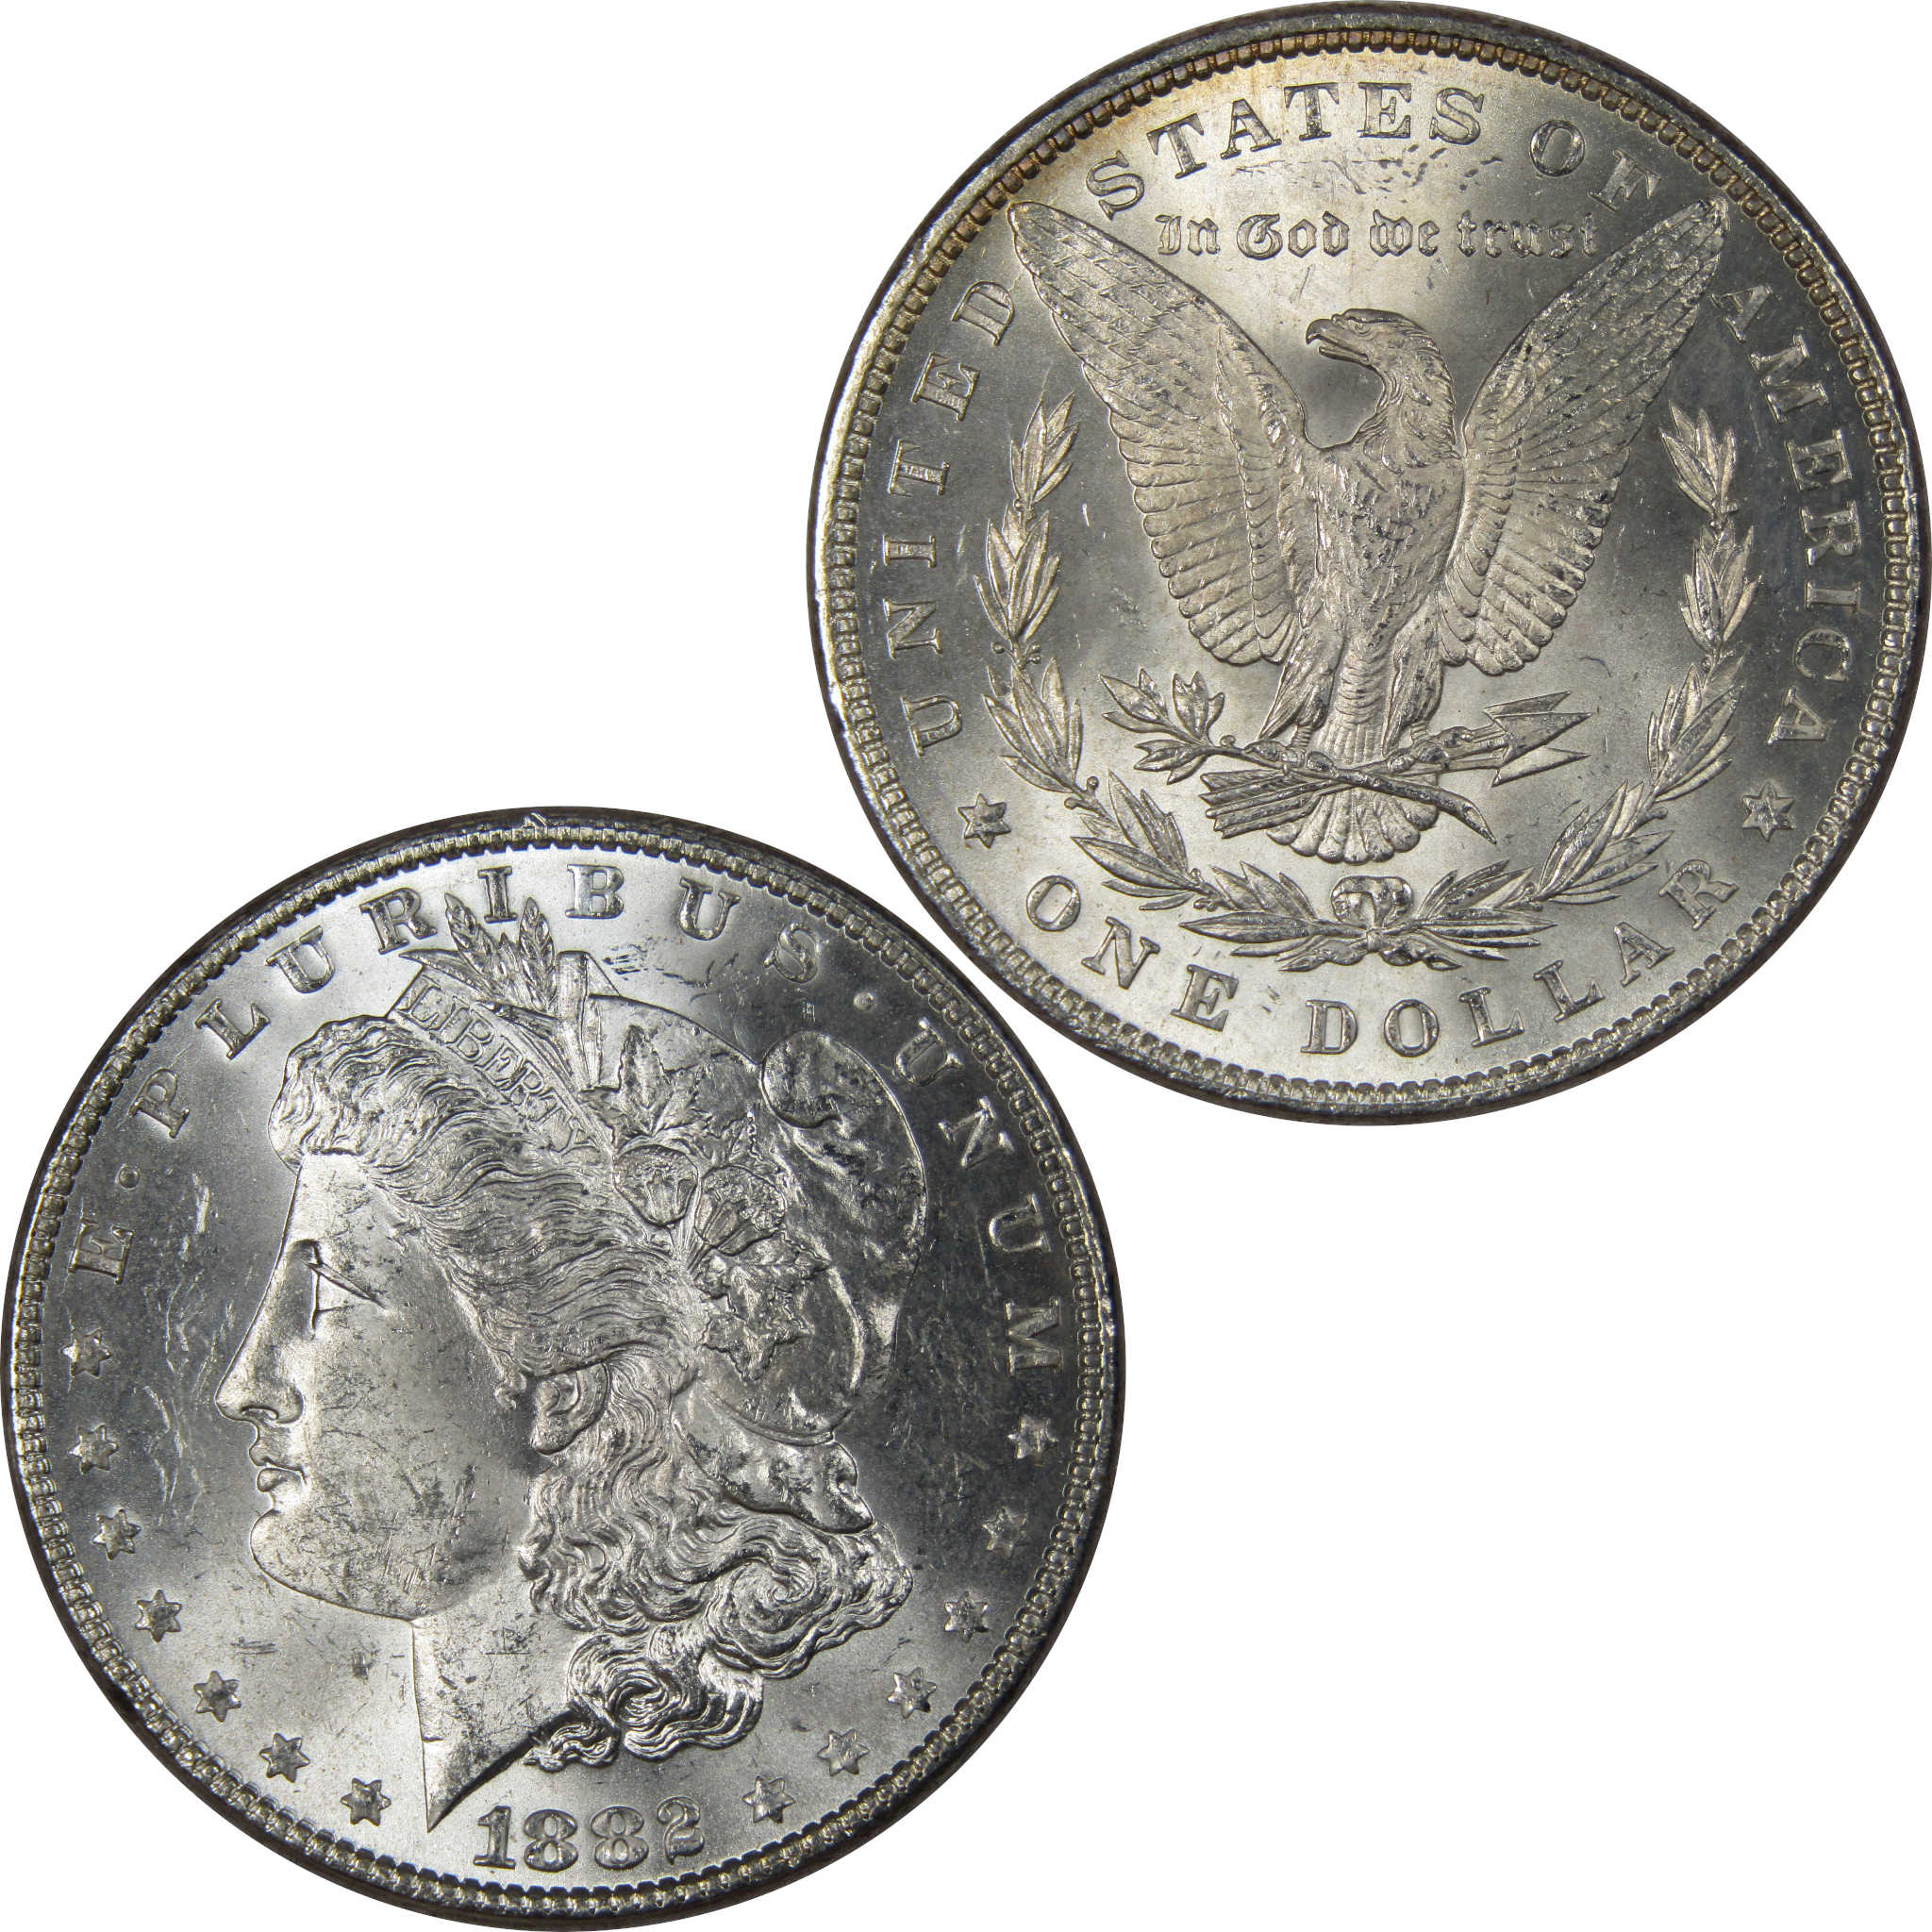 1882 Morgan Dollar BU Uncirculated Mint State 90% Silver SKU:IPC9667 - Morgan coin - Morgan silver dollar - Morgan silver dollar for sale - Profile Coins &amp; Collectibles